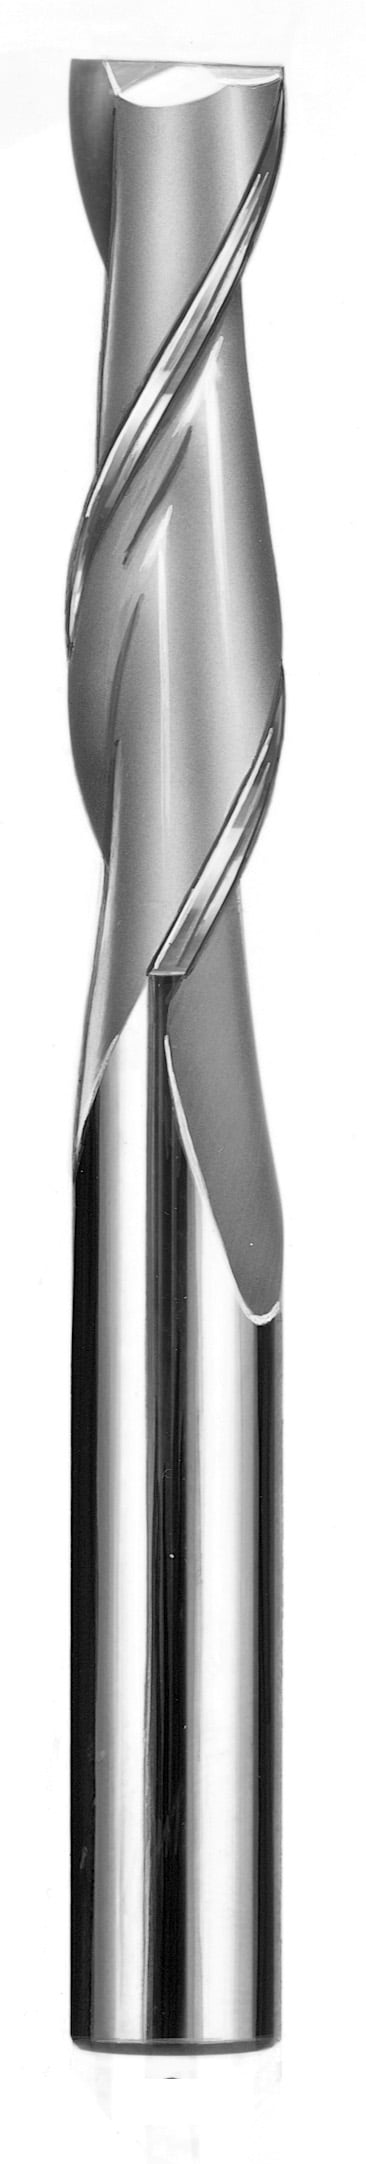 5/16" Dia, 2 Flute, Square End End Mill - 33305